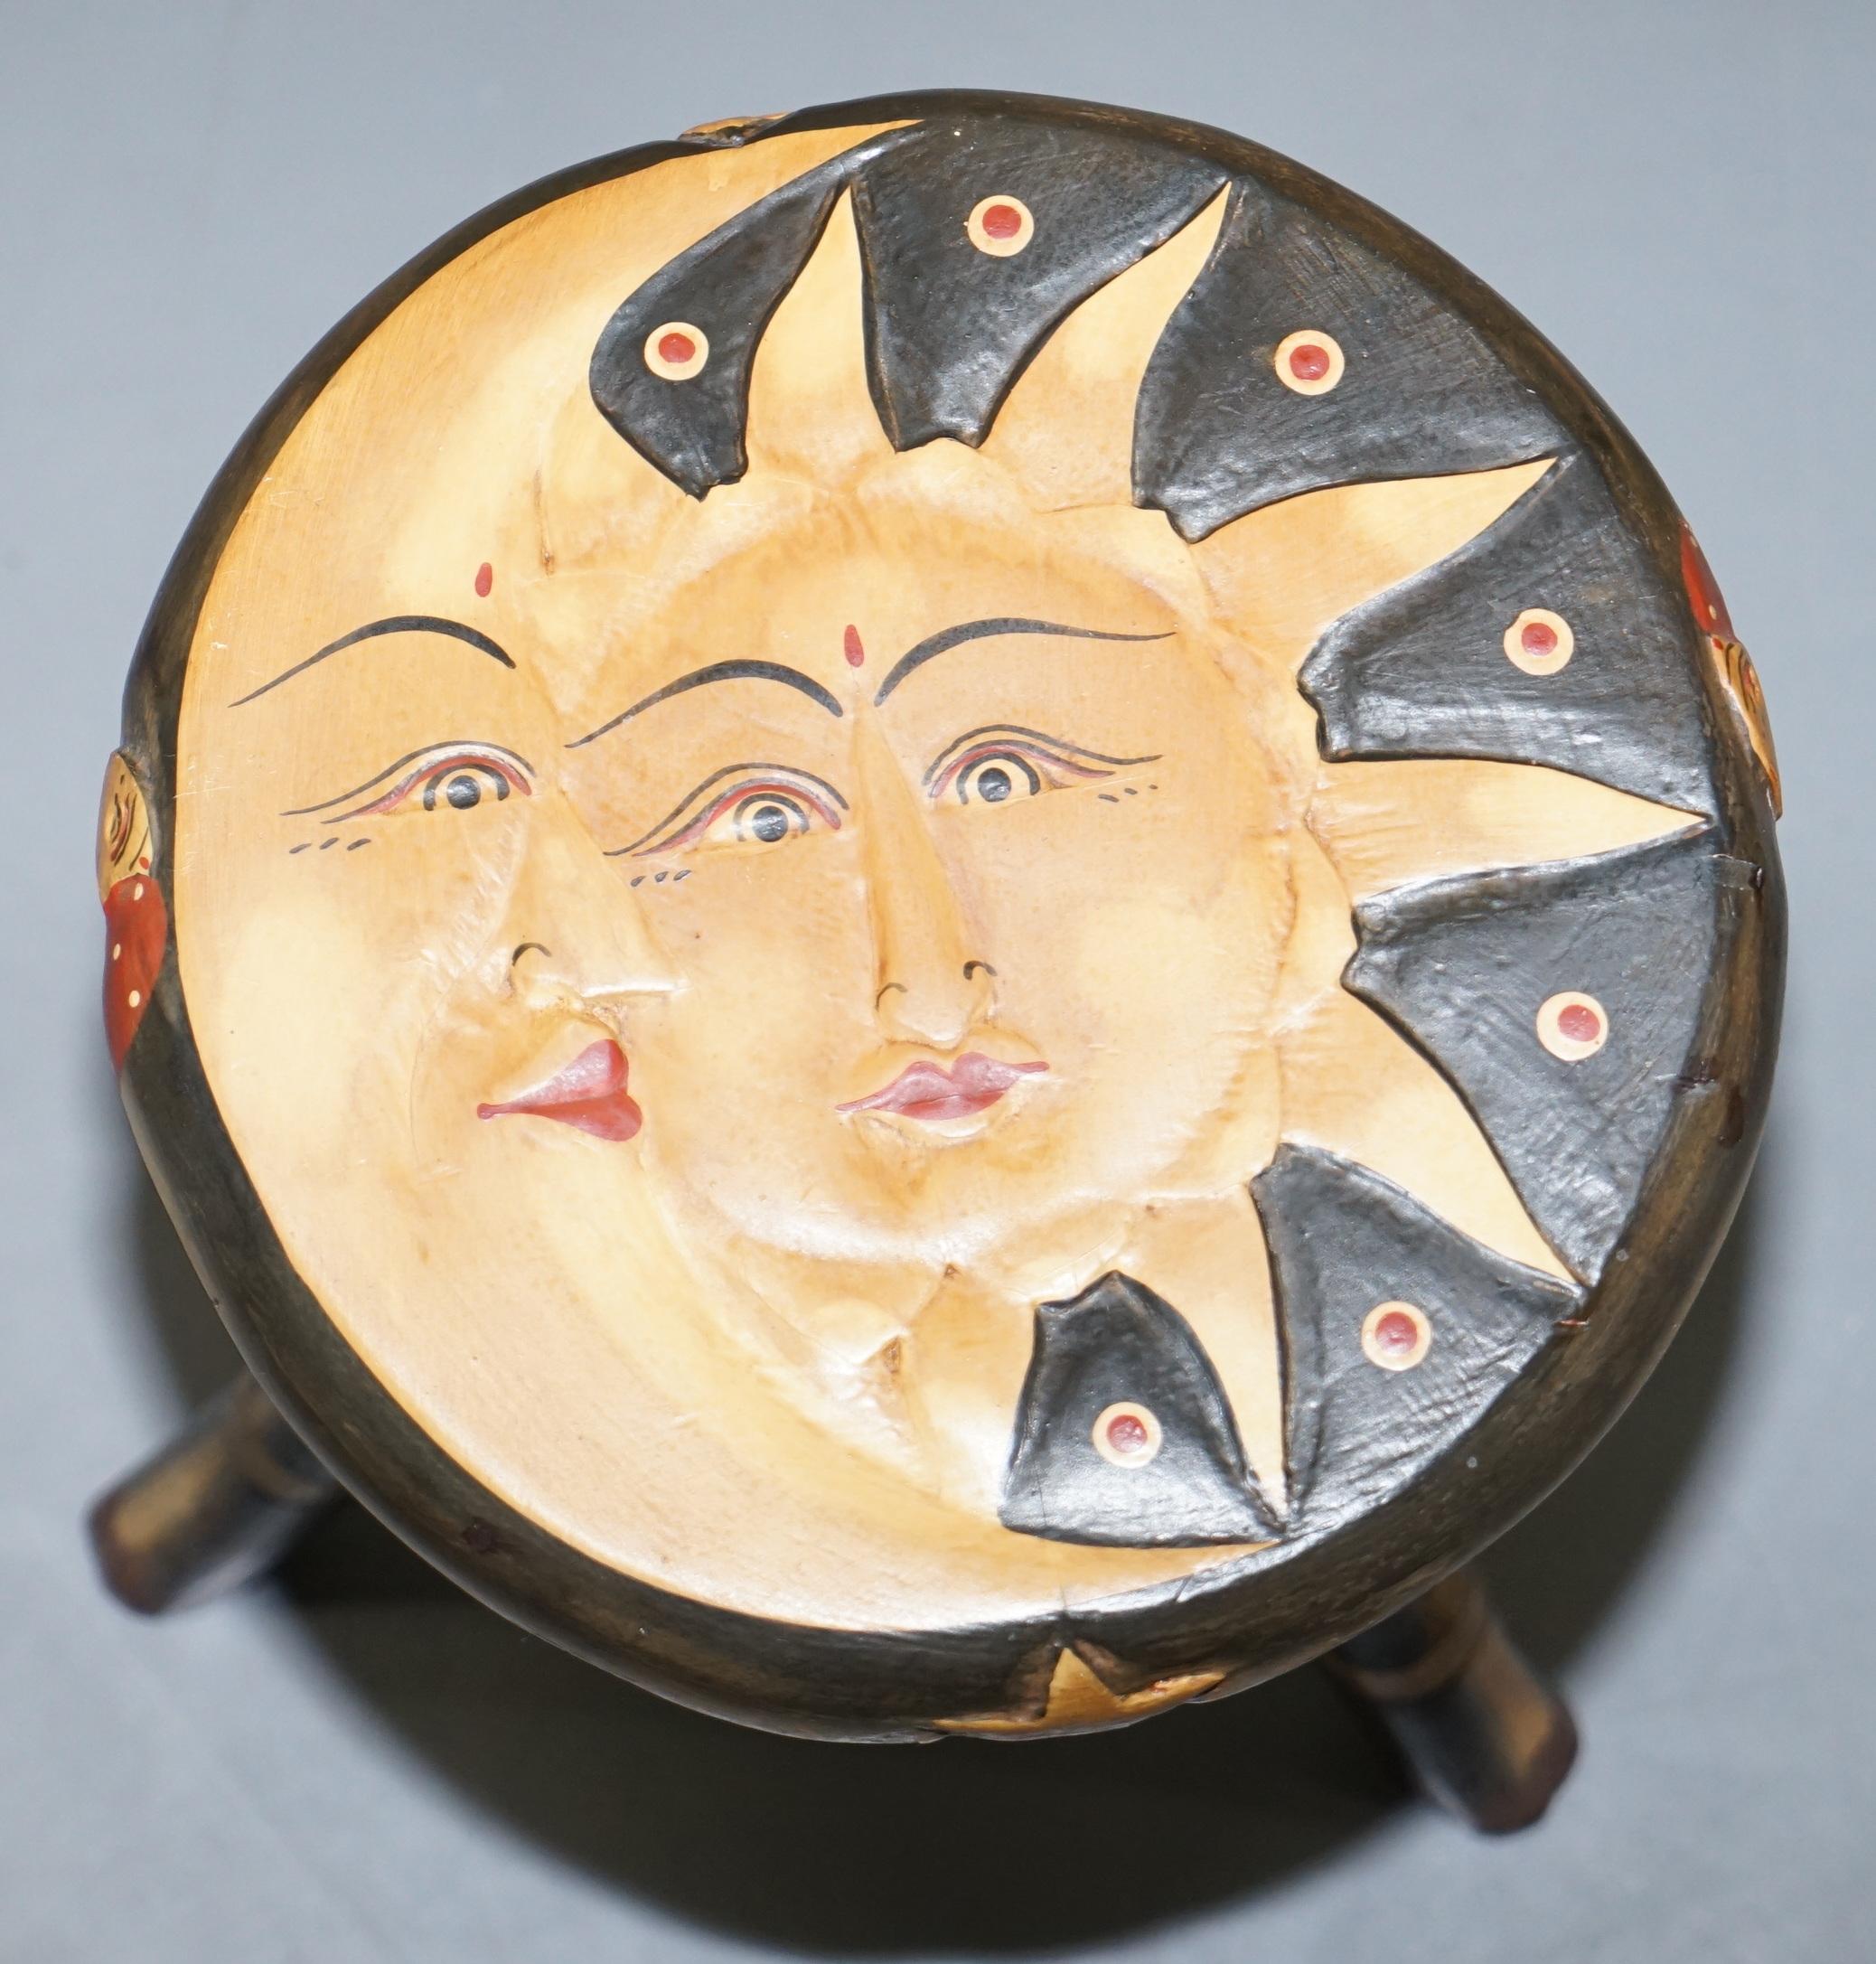 Wimbledon-Furniture

Wimbledon-Furniture is delighted to offer for sale this very nice hand painted childrens stool depicting the Moon and Sun

Please note the delivery fee listed is just a guide, it covers within the M25 only, for an accurate